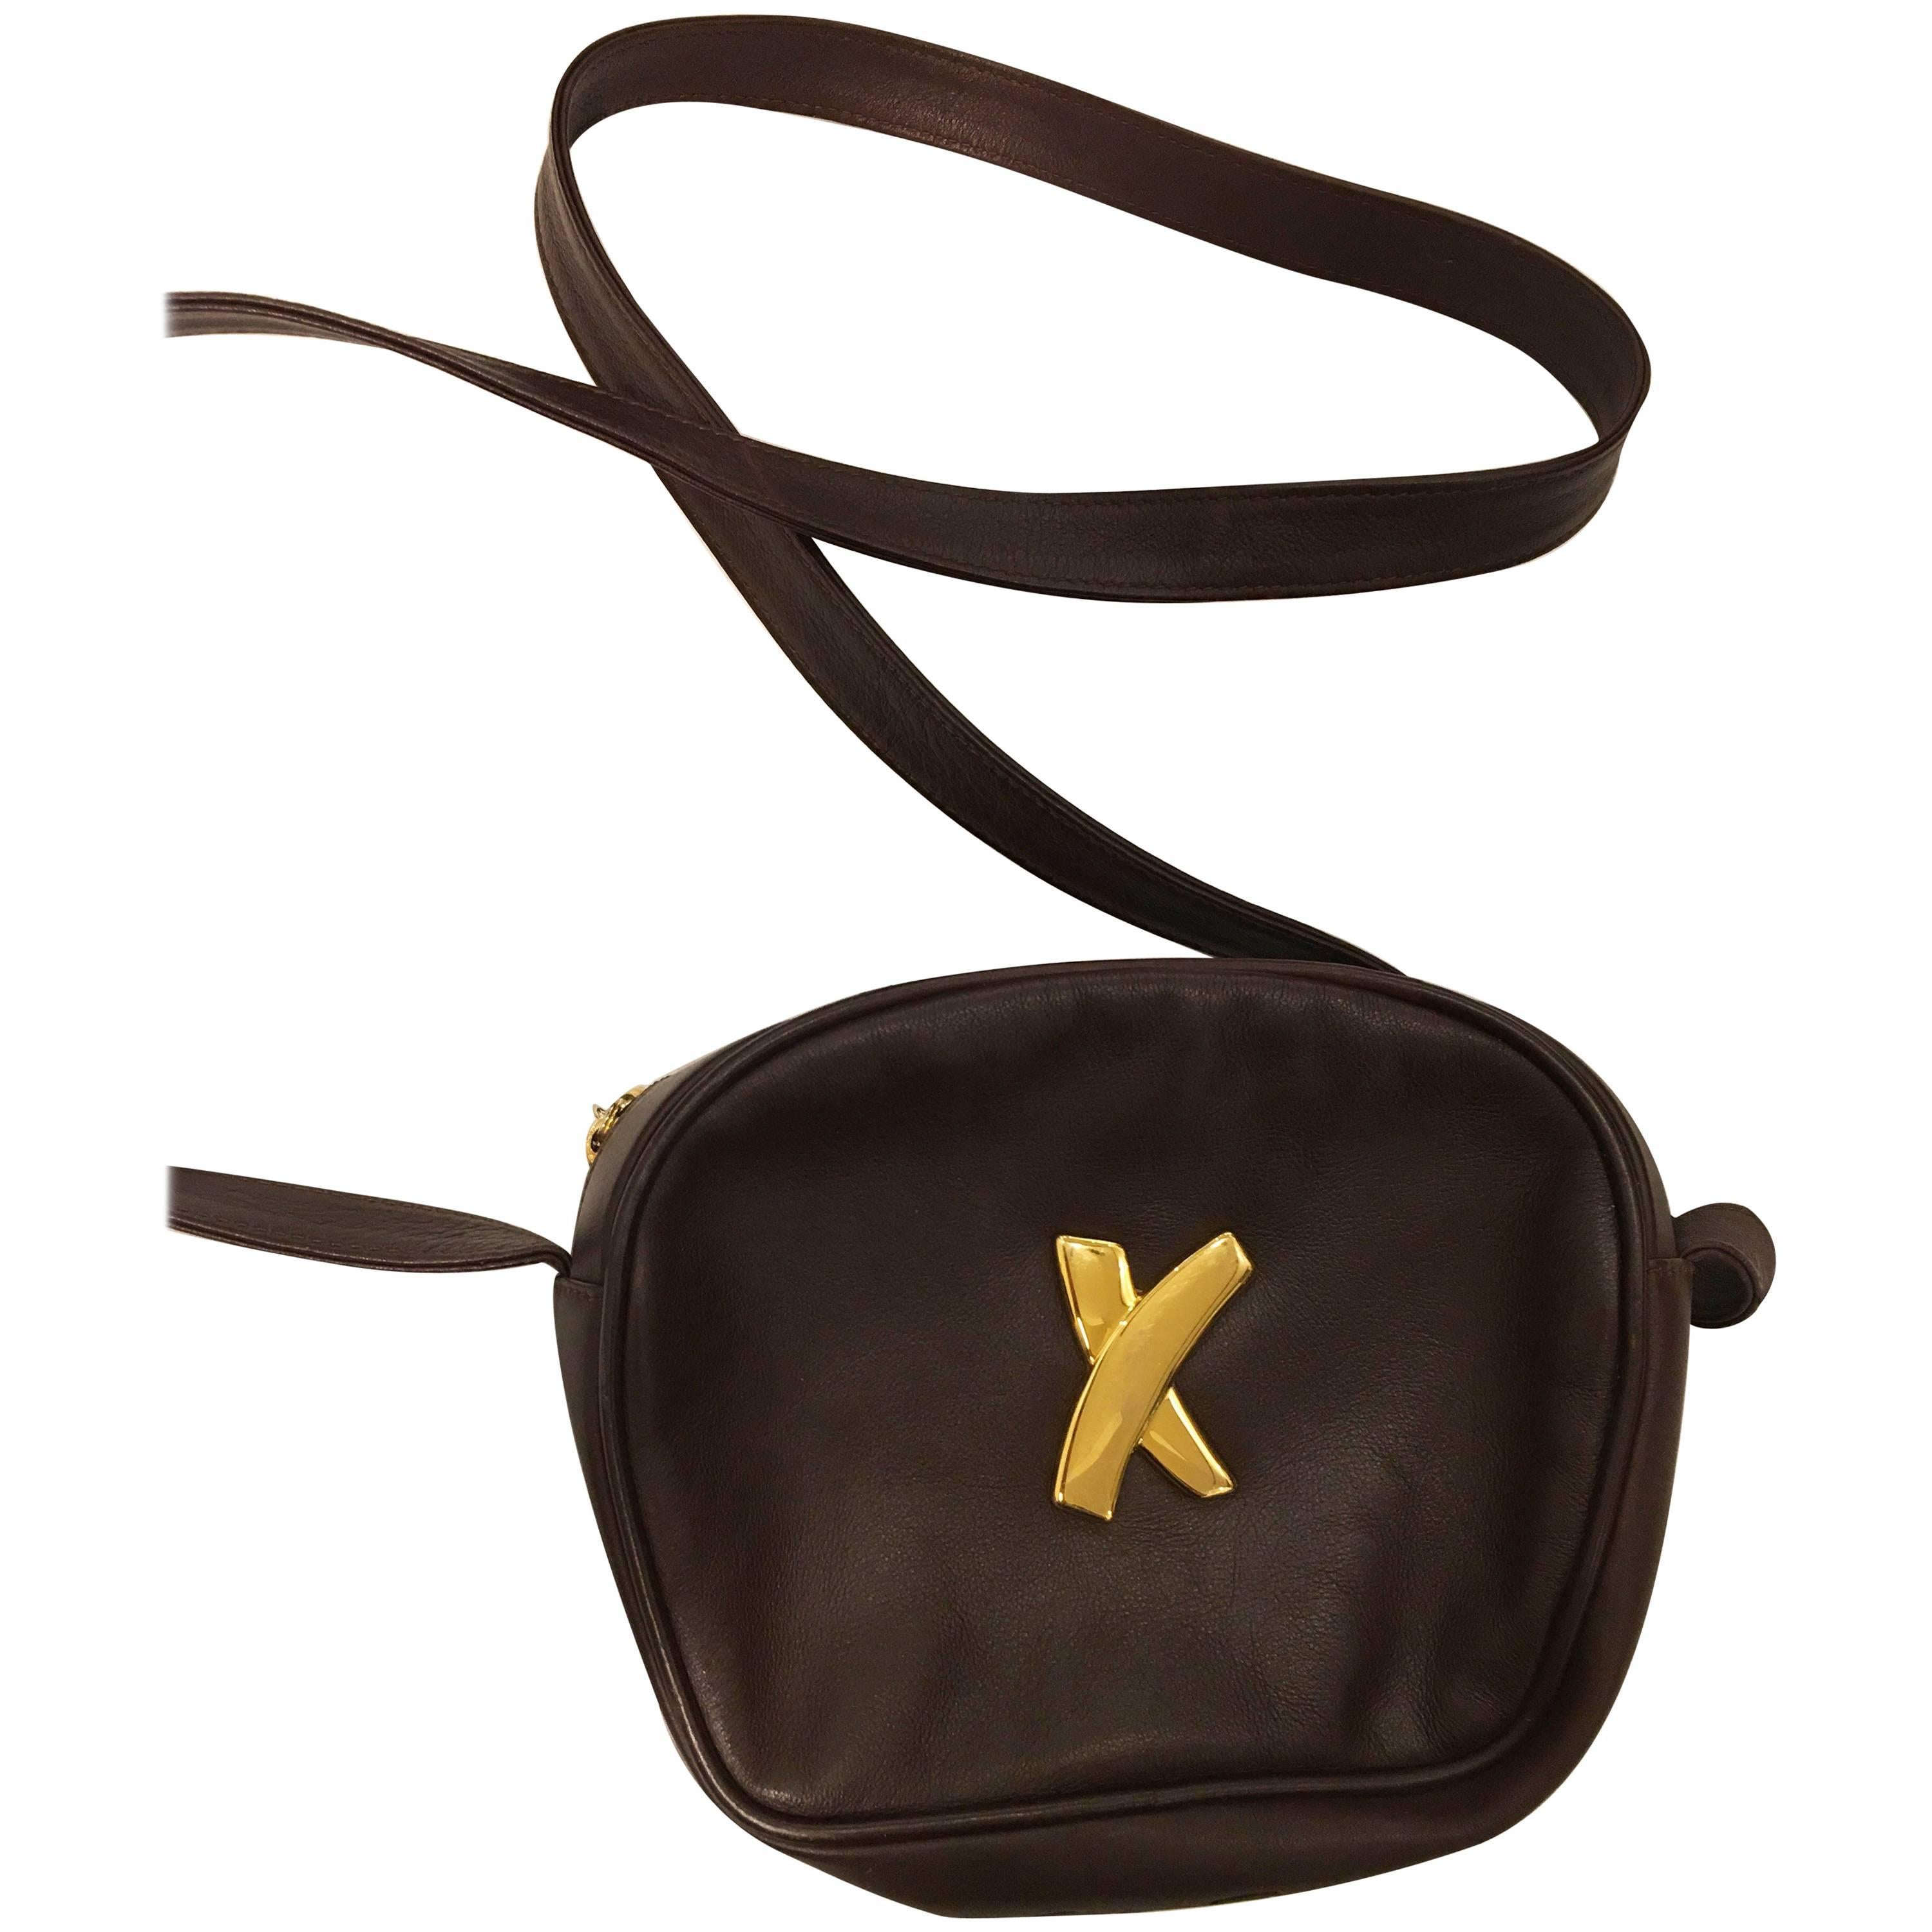 Paloma Picasso Brown Leather Crossbody Bag